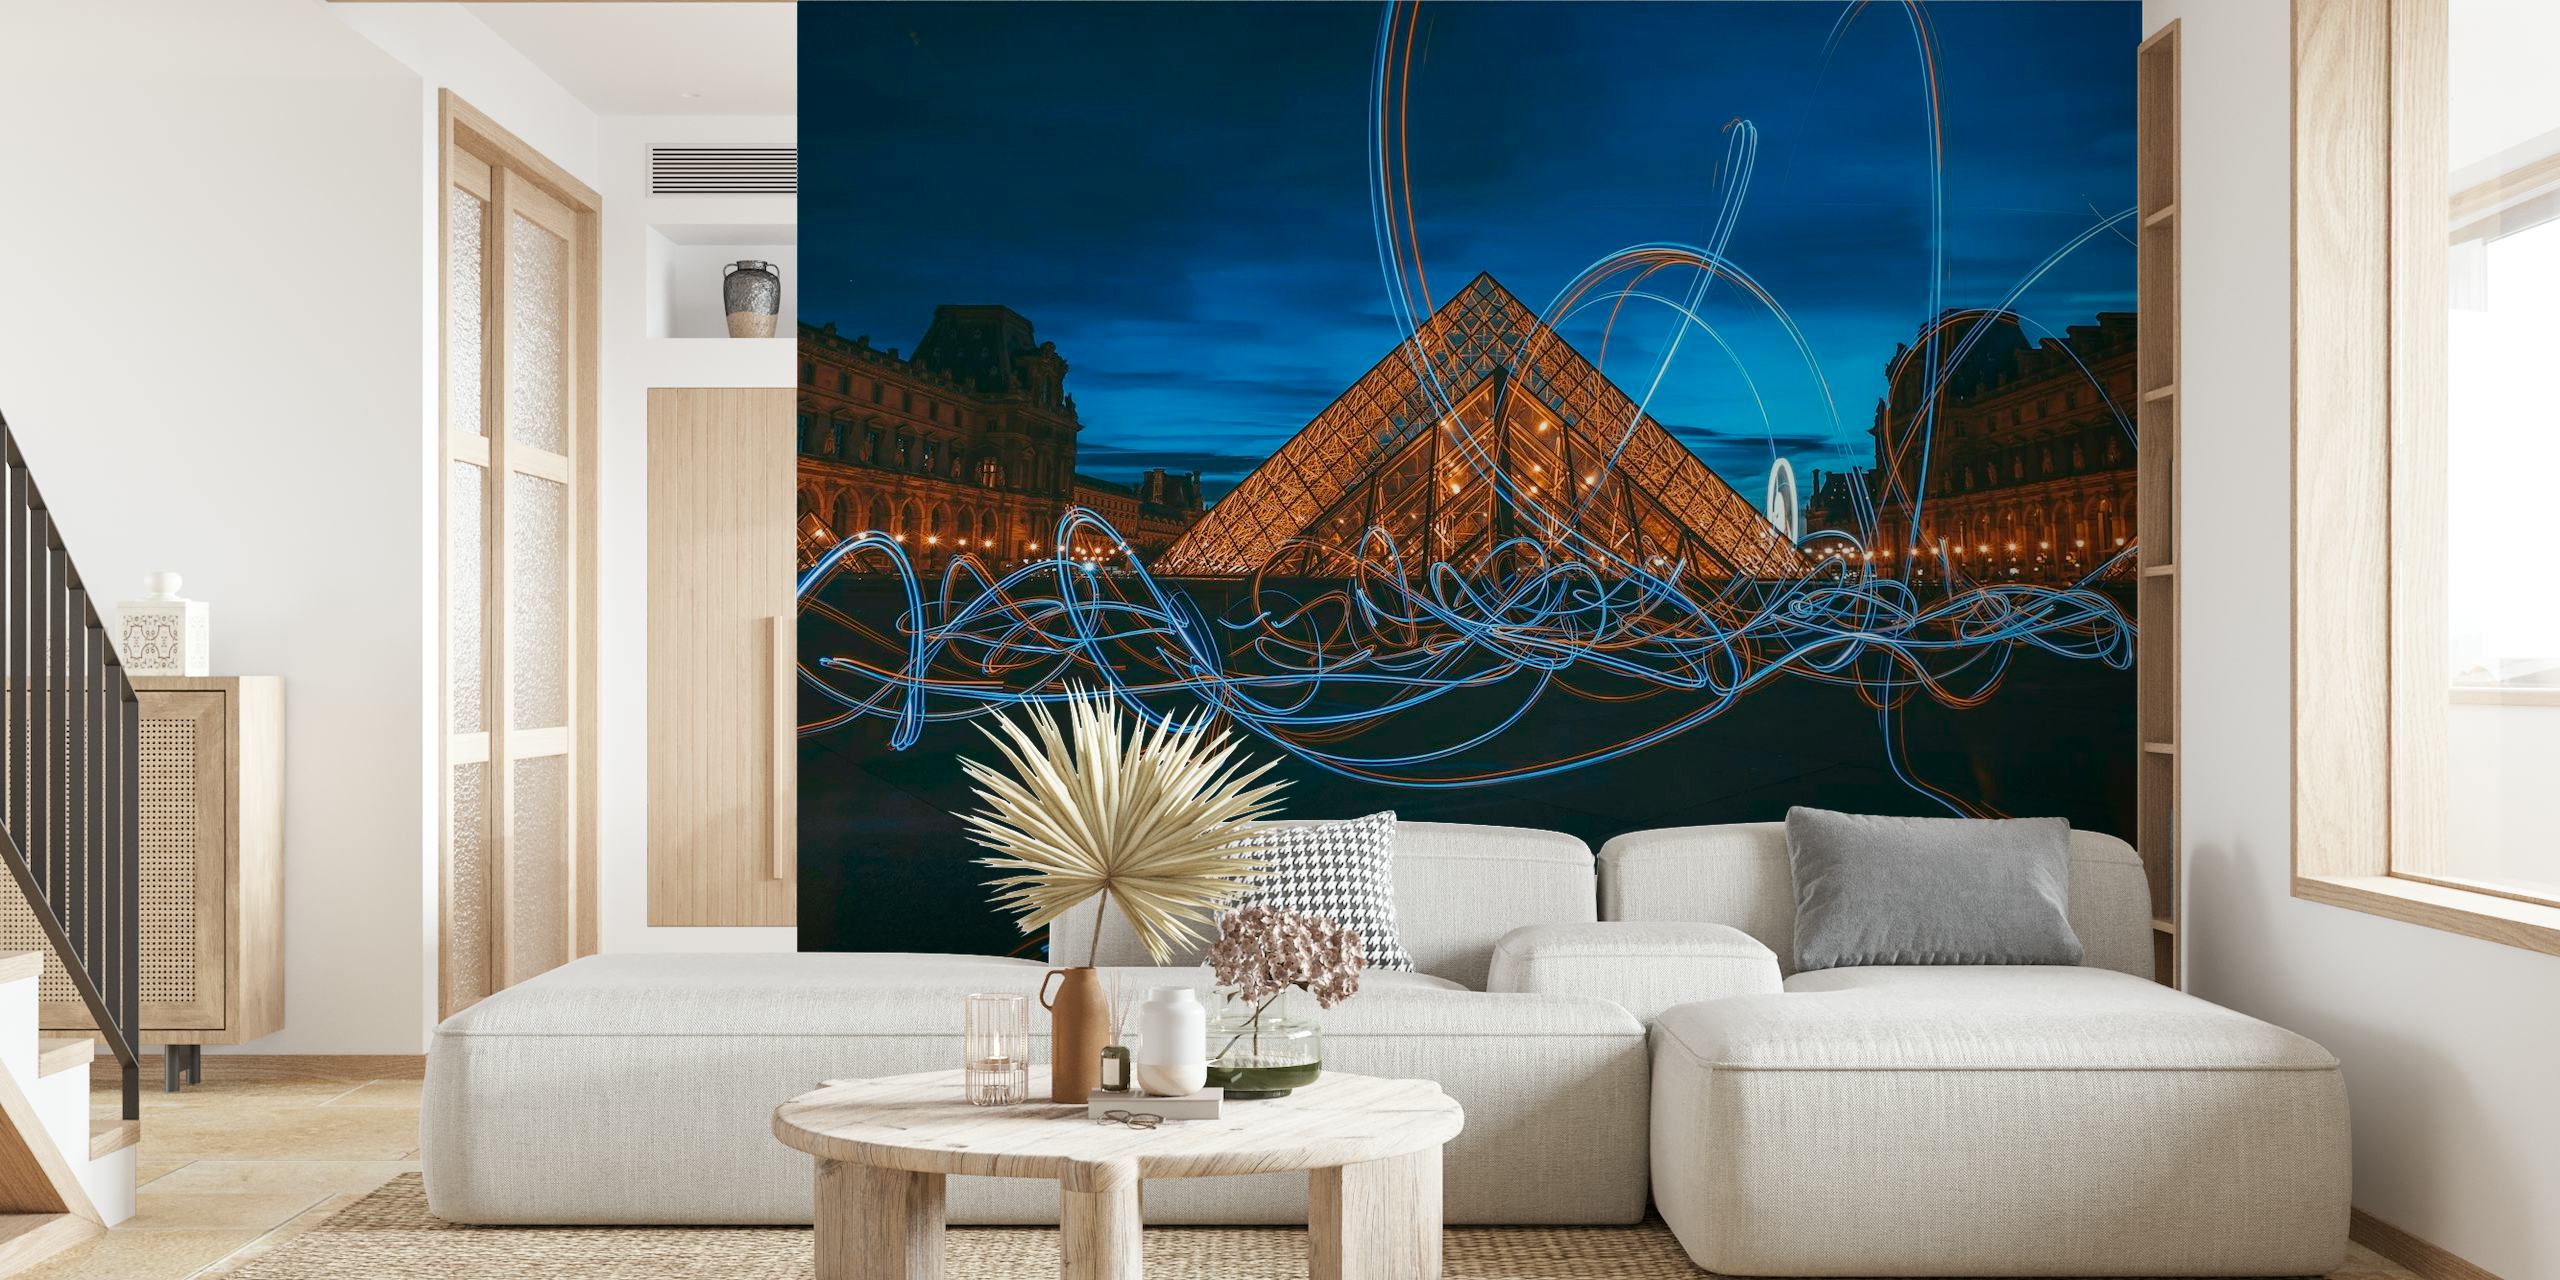 Light painting at Louvre Museum wallpaper